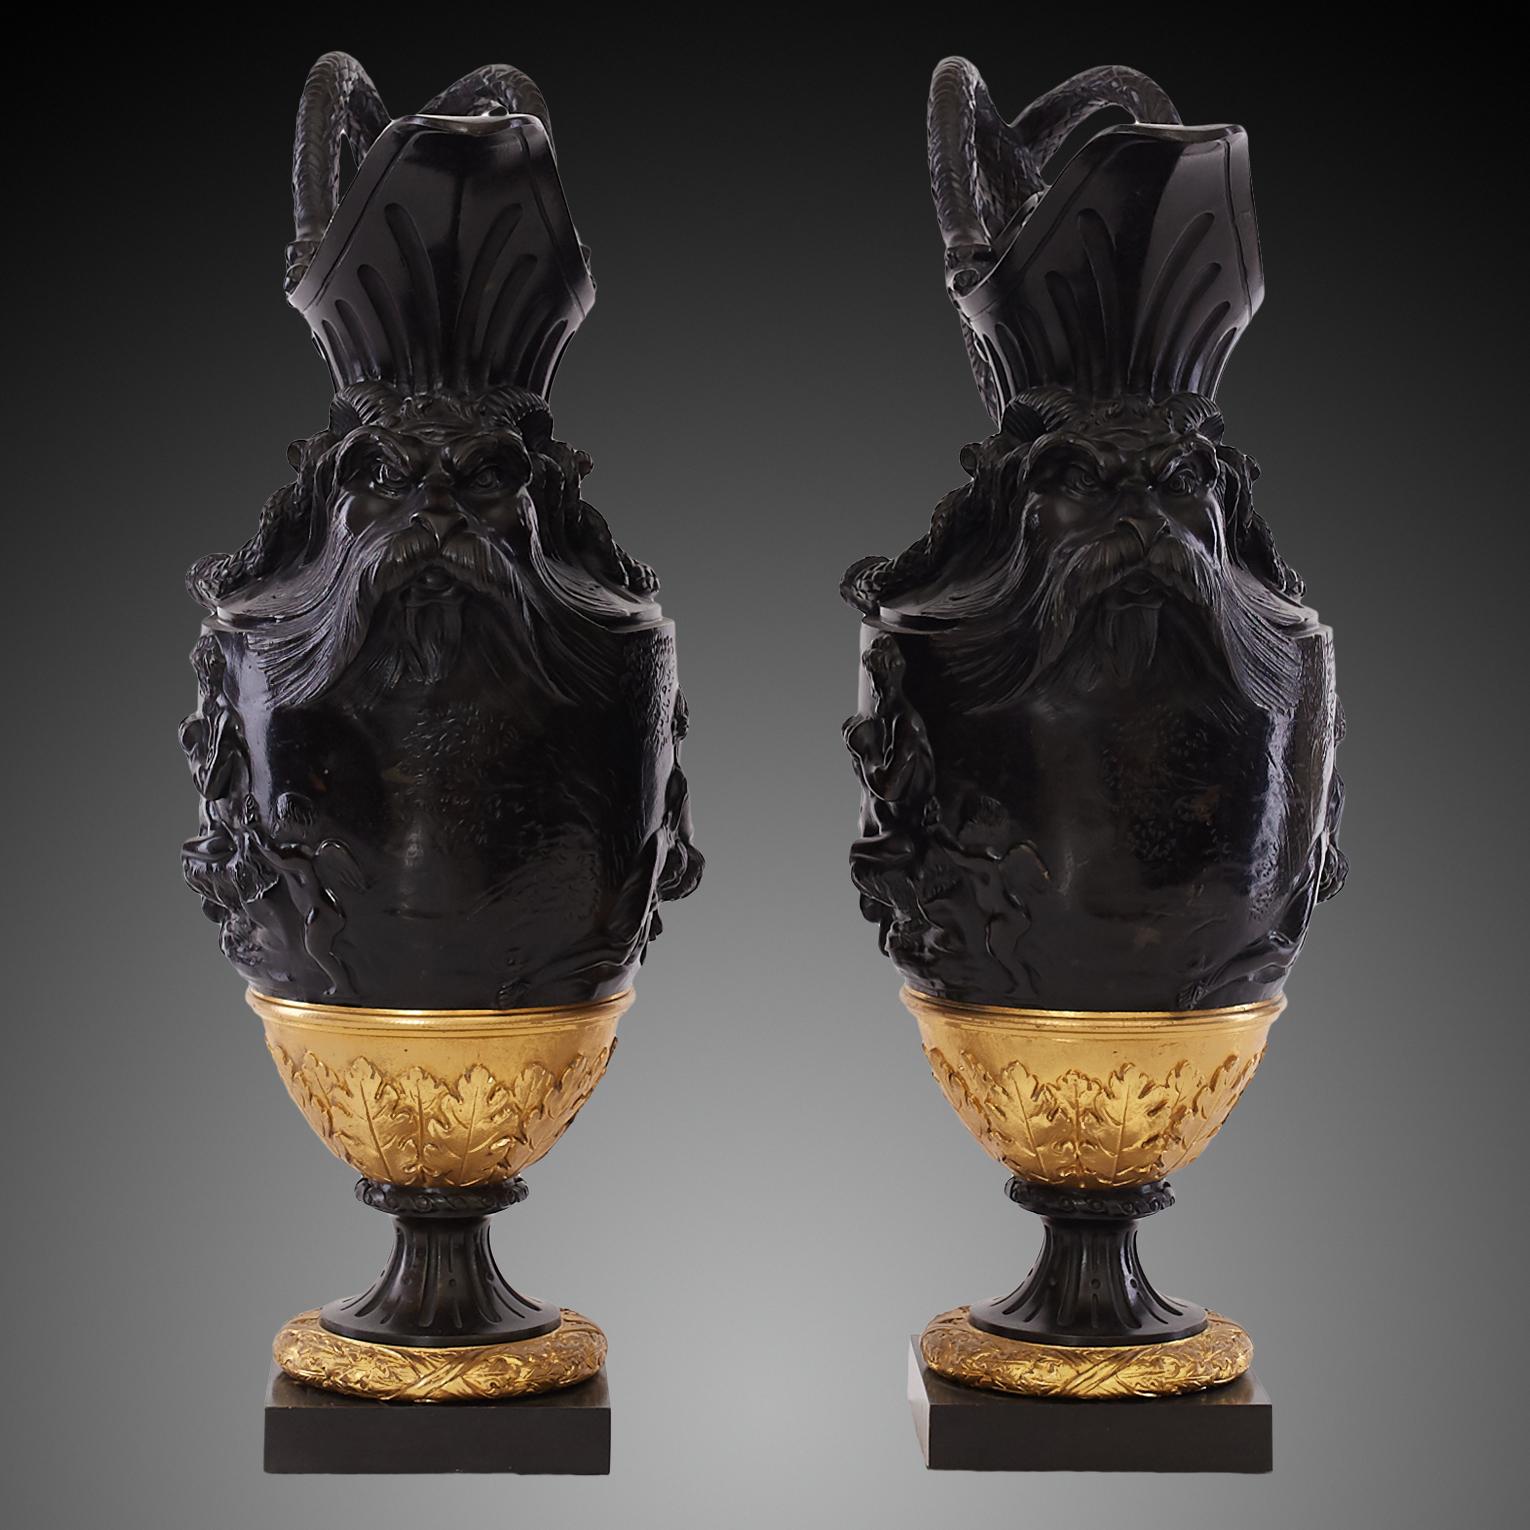 French 19th Century Gilt Bronze Two-Piece Mantle Urns For Sale